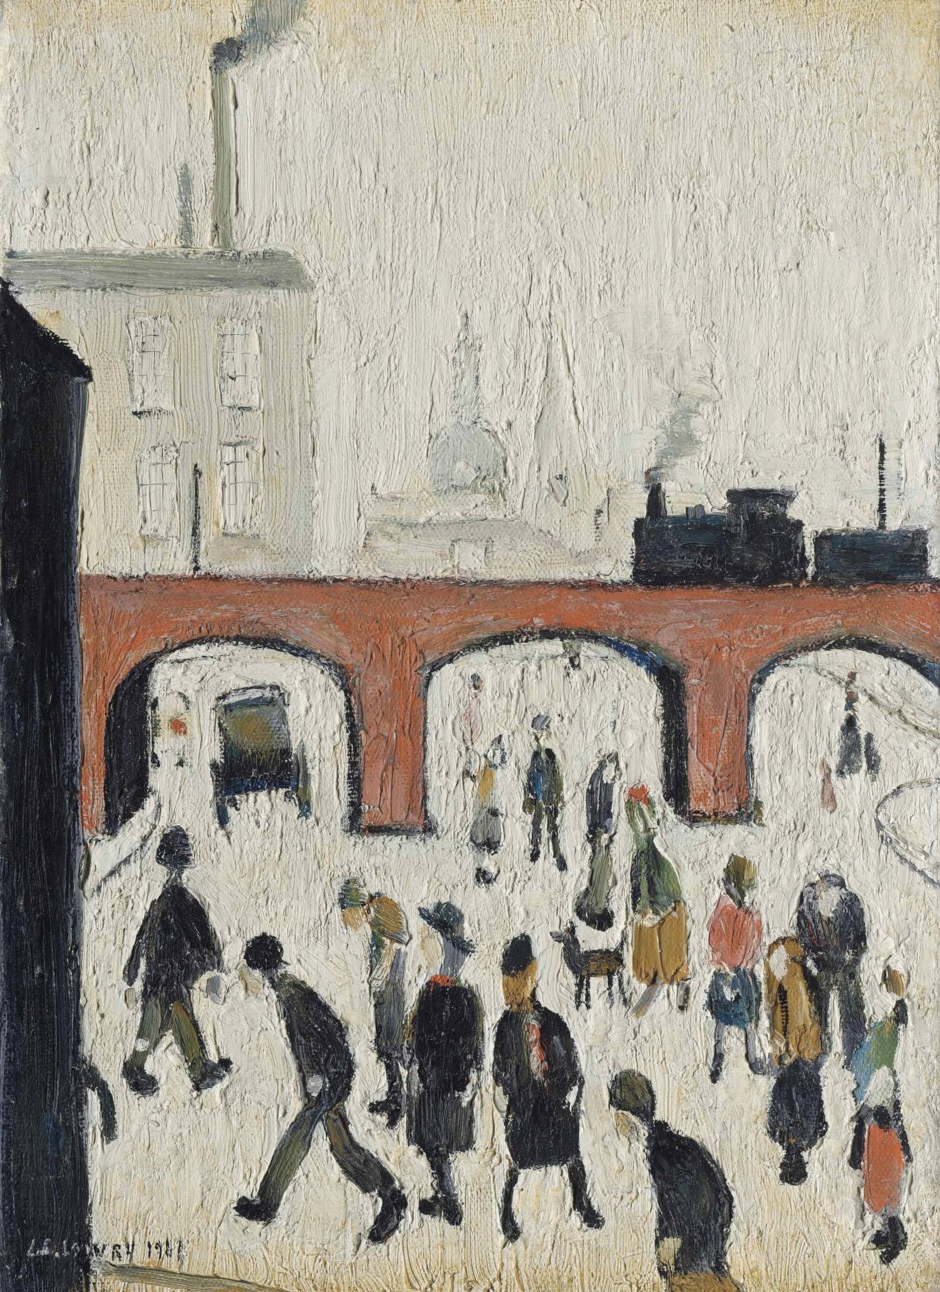 A Street Scene (1961) by Laurence Stephen Lowry (1887 - 1976), English artist.